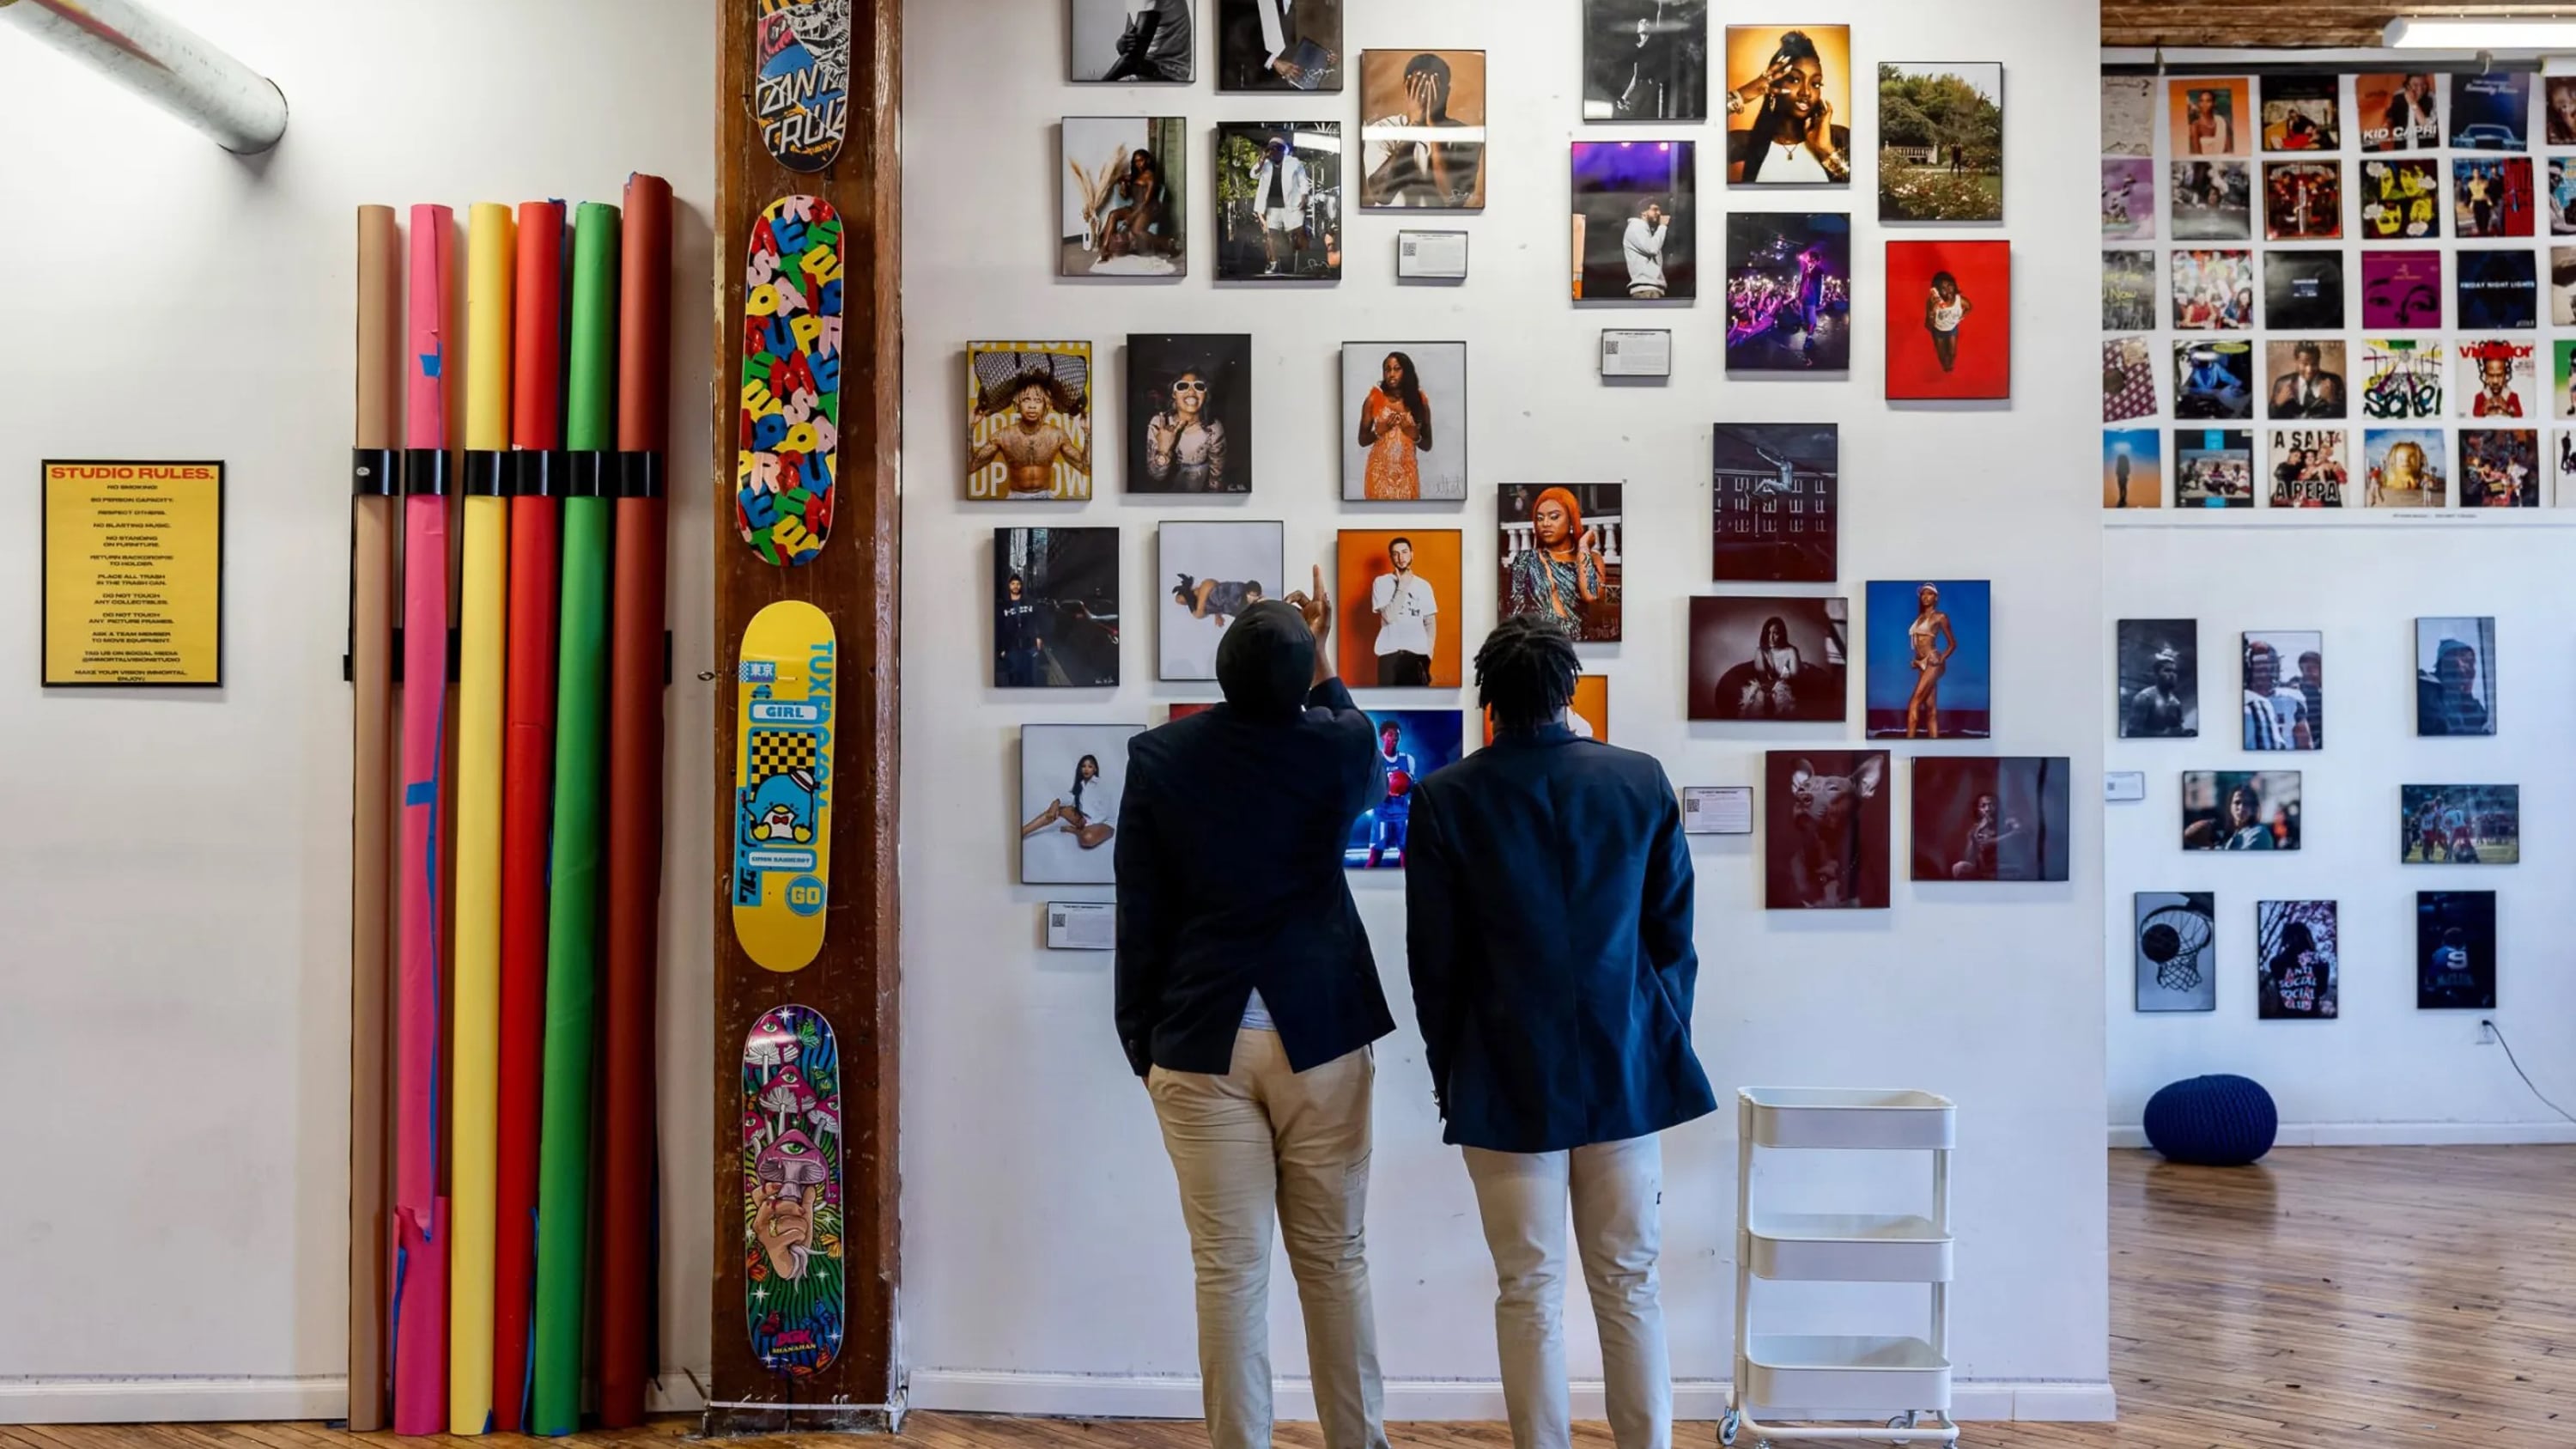 Two boys look up at photographs and skateboards hanging on a white wall.